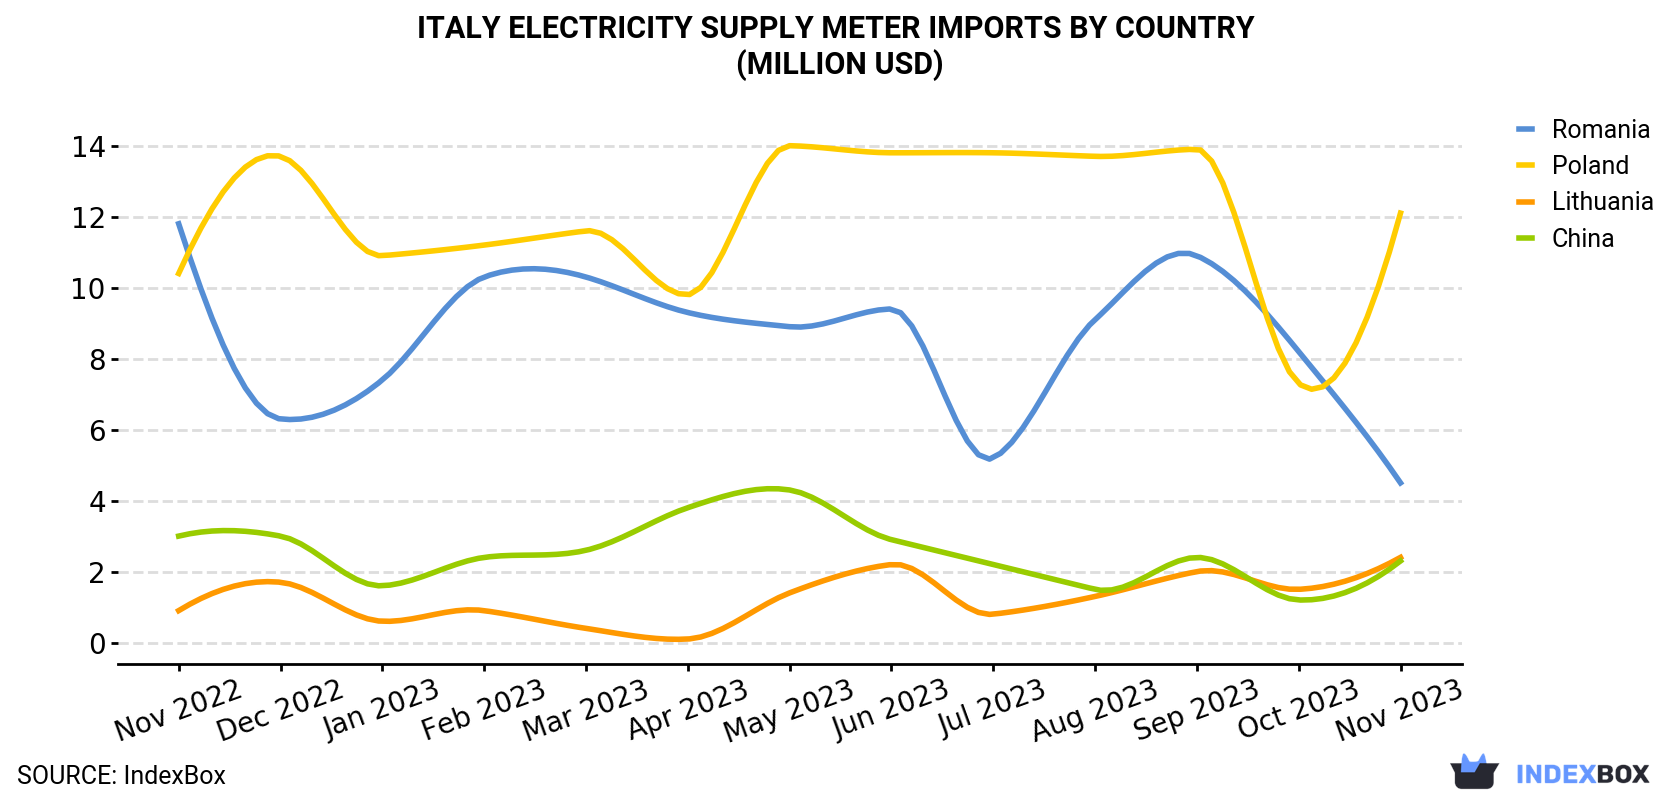 Italy Electricity Supply Meter Imports By Country (Million USD)